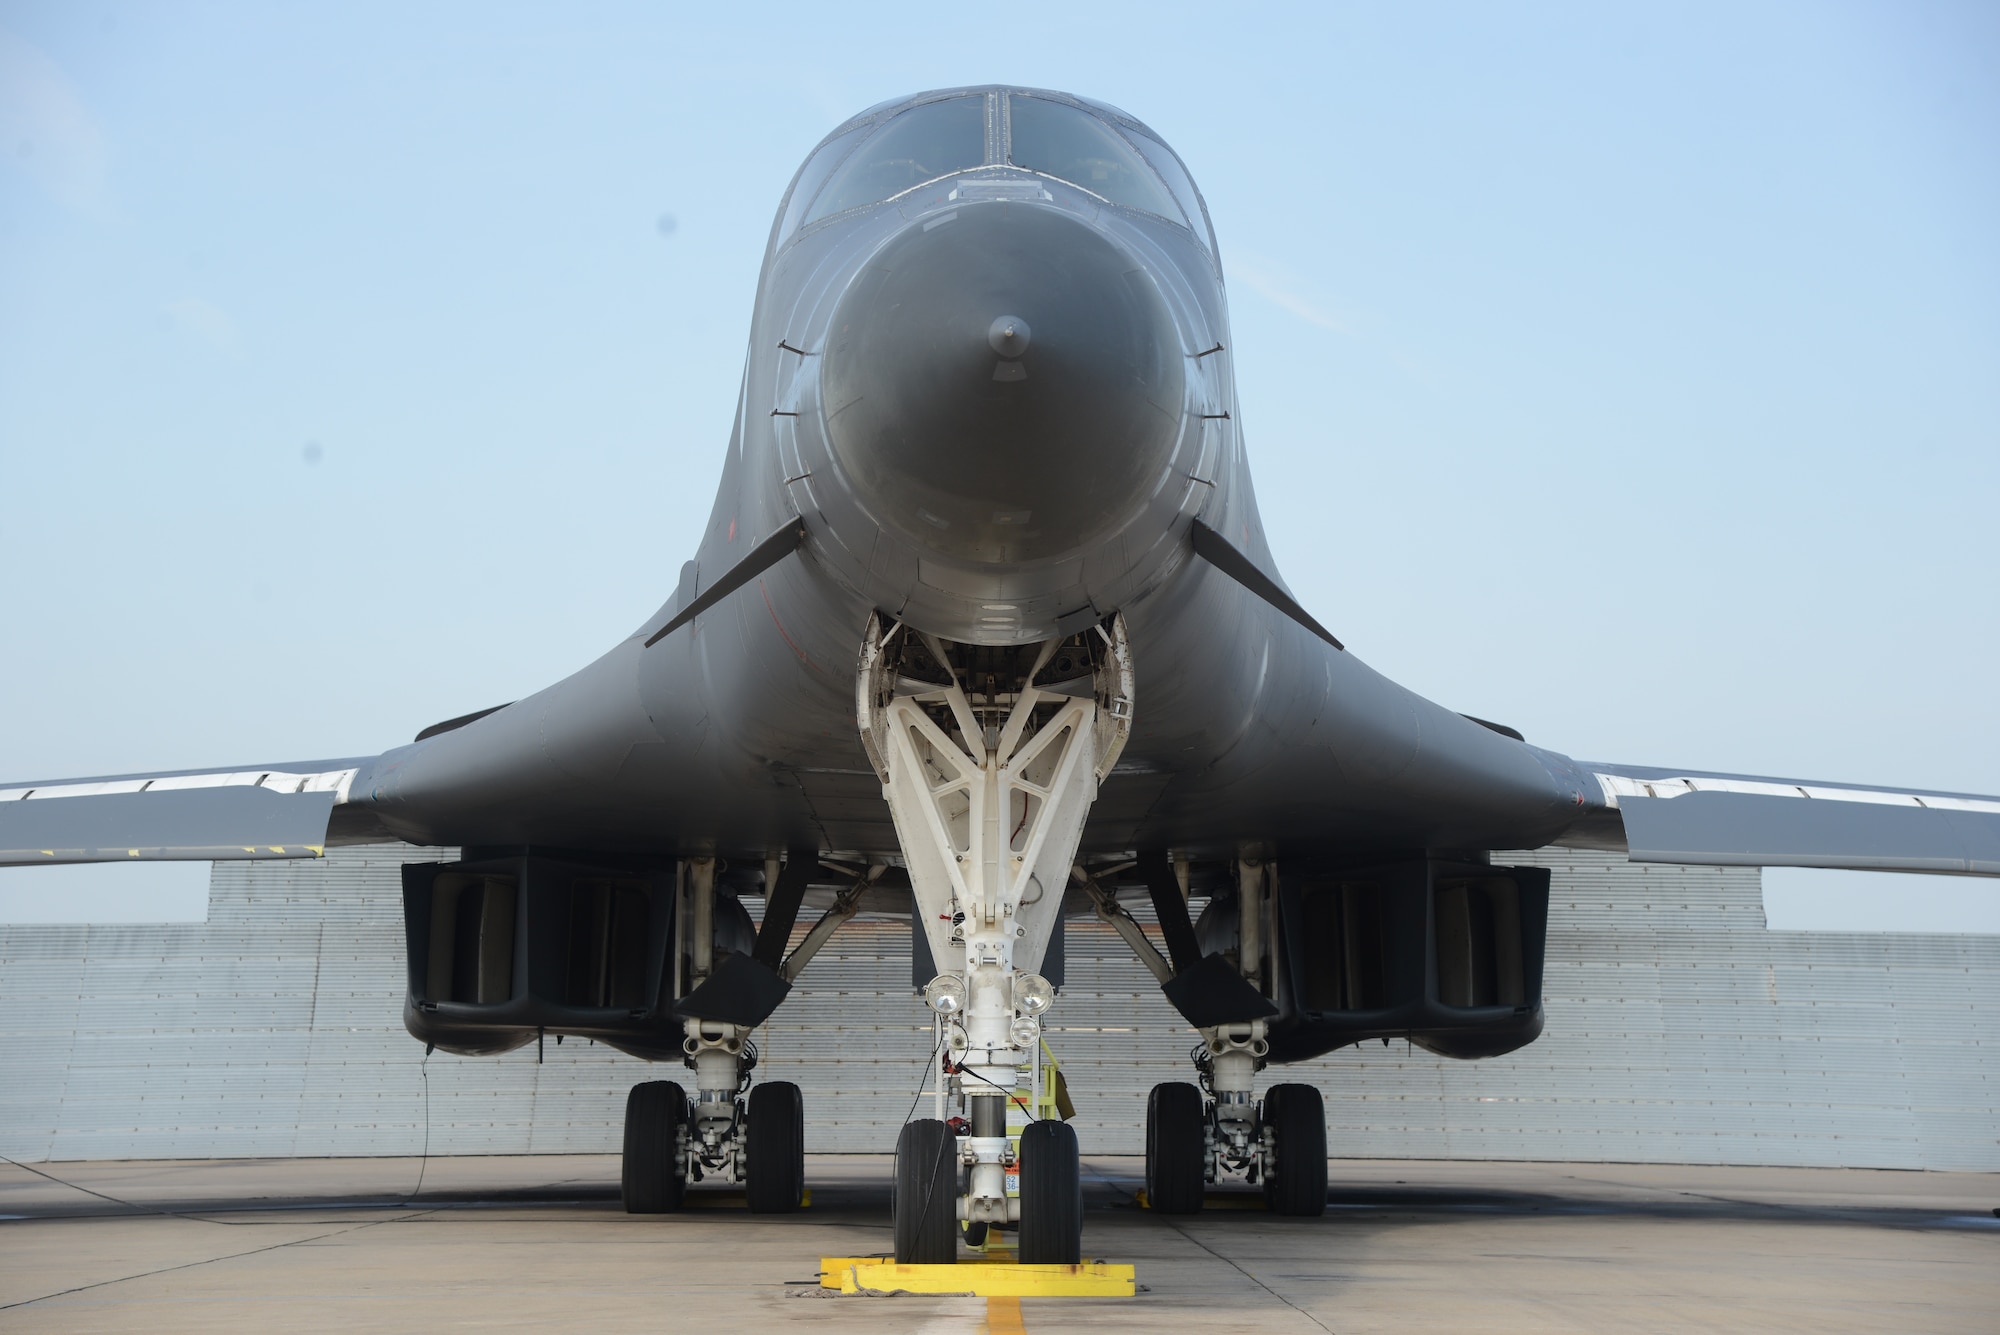 The B-1 Lancer has been flown hard for the past 15 years. To keep the fleet serving the Air Force for the next 20 years and beyond, it’s receiving dedicated structural repair and maintenance at Tinker. (U.S. Air Force photo/Kelly White)